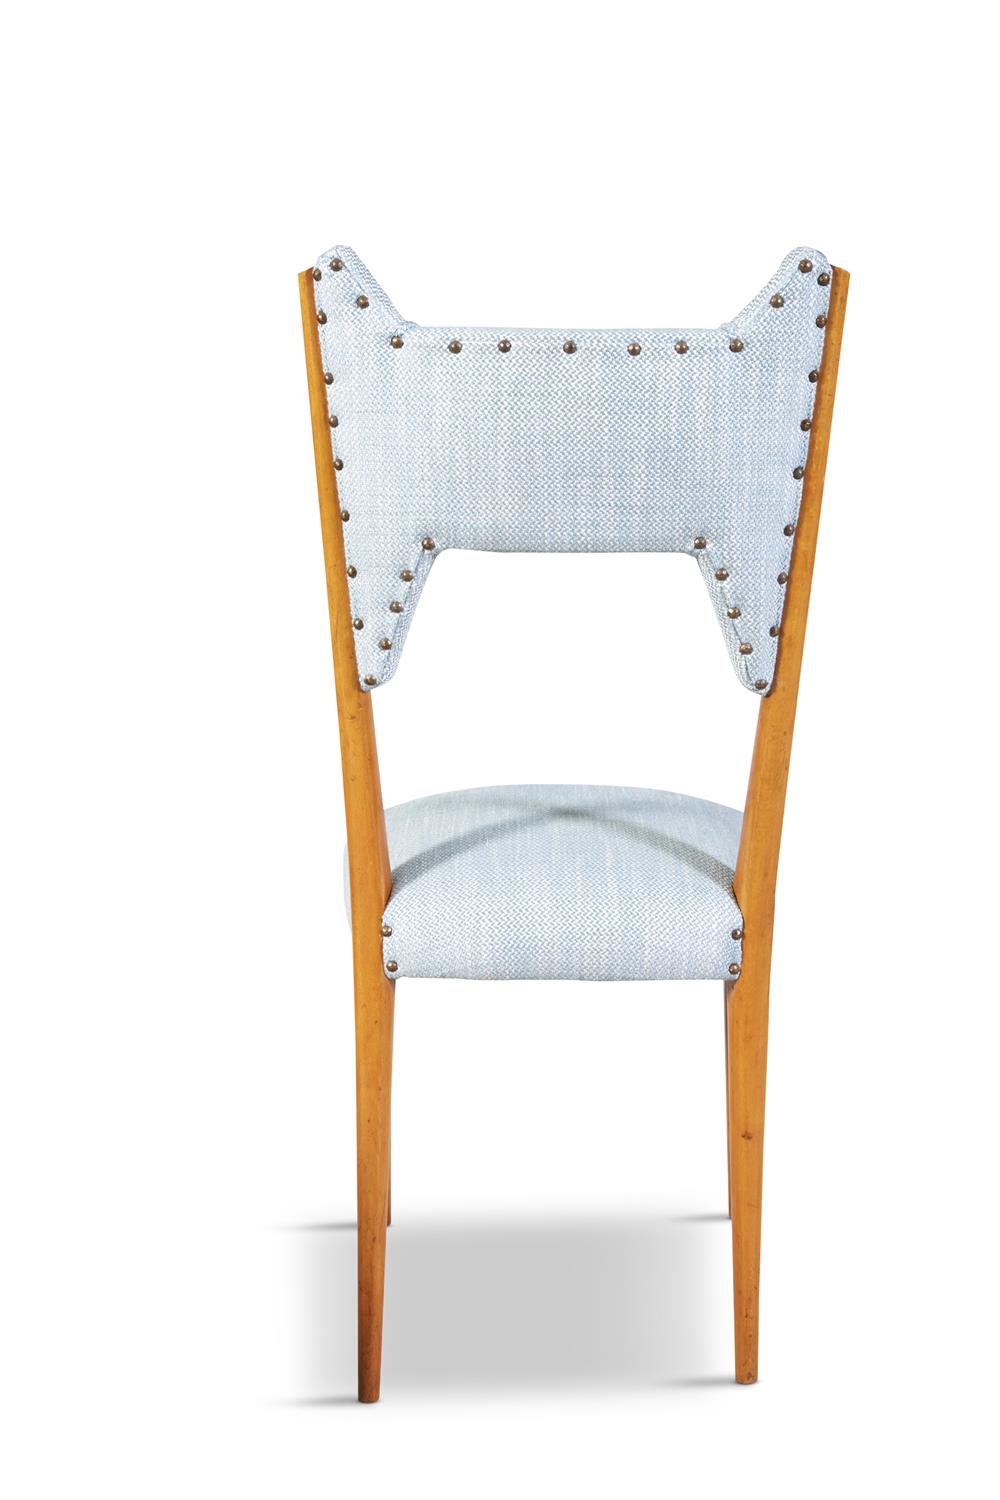 MELCHIORRE BEGA A set of six chairs, attrib. to Melchiorre Bega, recently upholstered. Italy, c. - Image 6 of 6